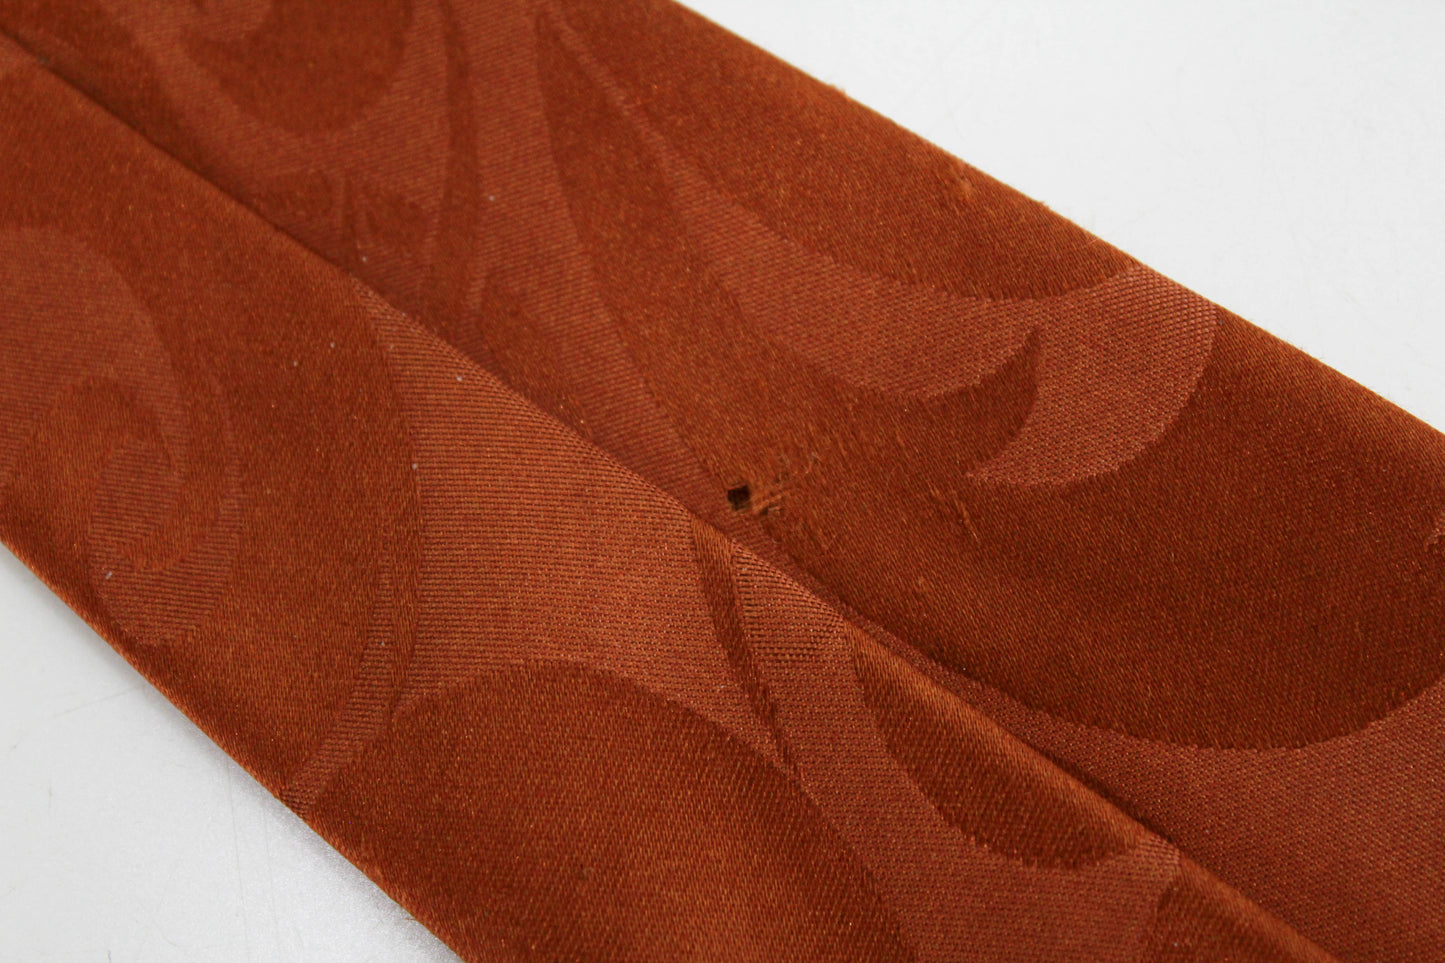 1940s Rayon Necktie, Brown Jacquard with Floral Illustration Print